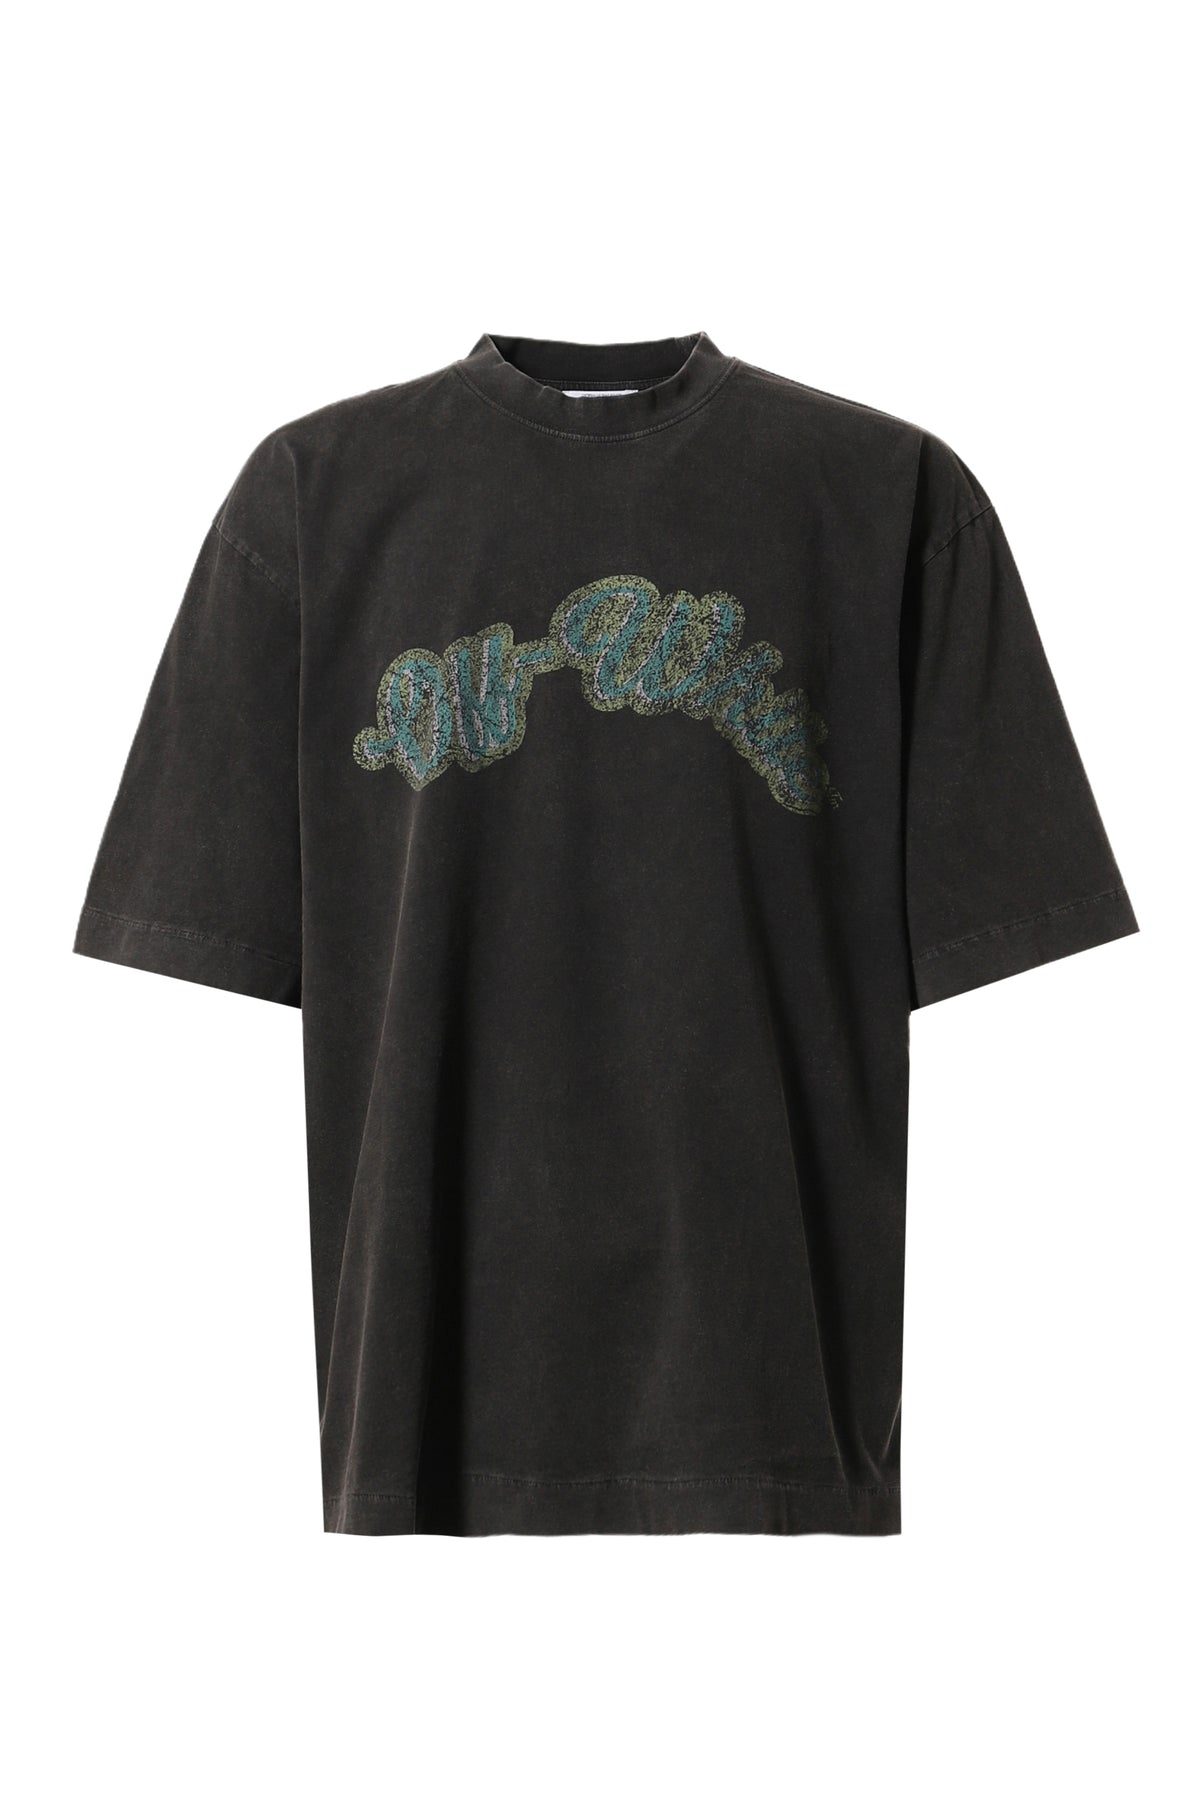 GREEN BACCHUS SKATE S/S TEE / BLK COLLEGE